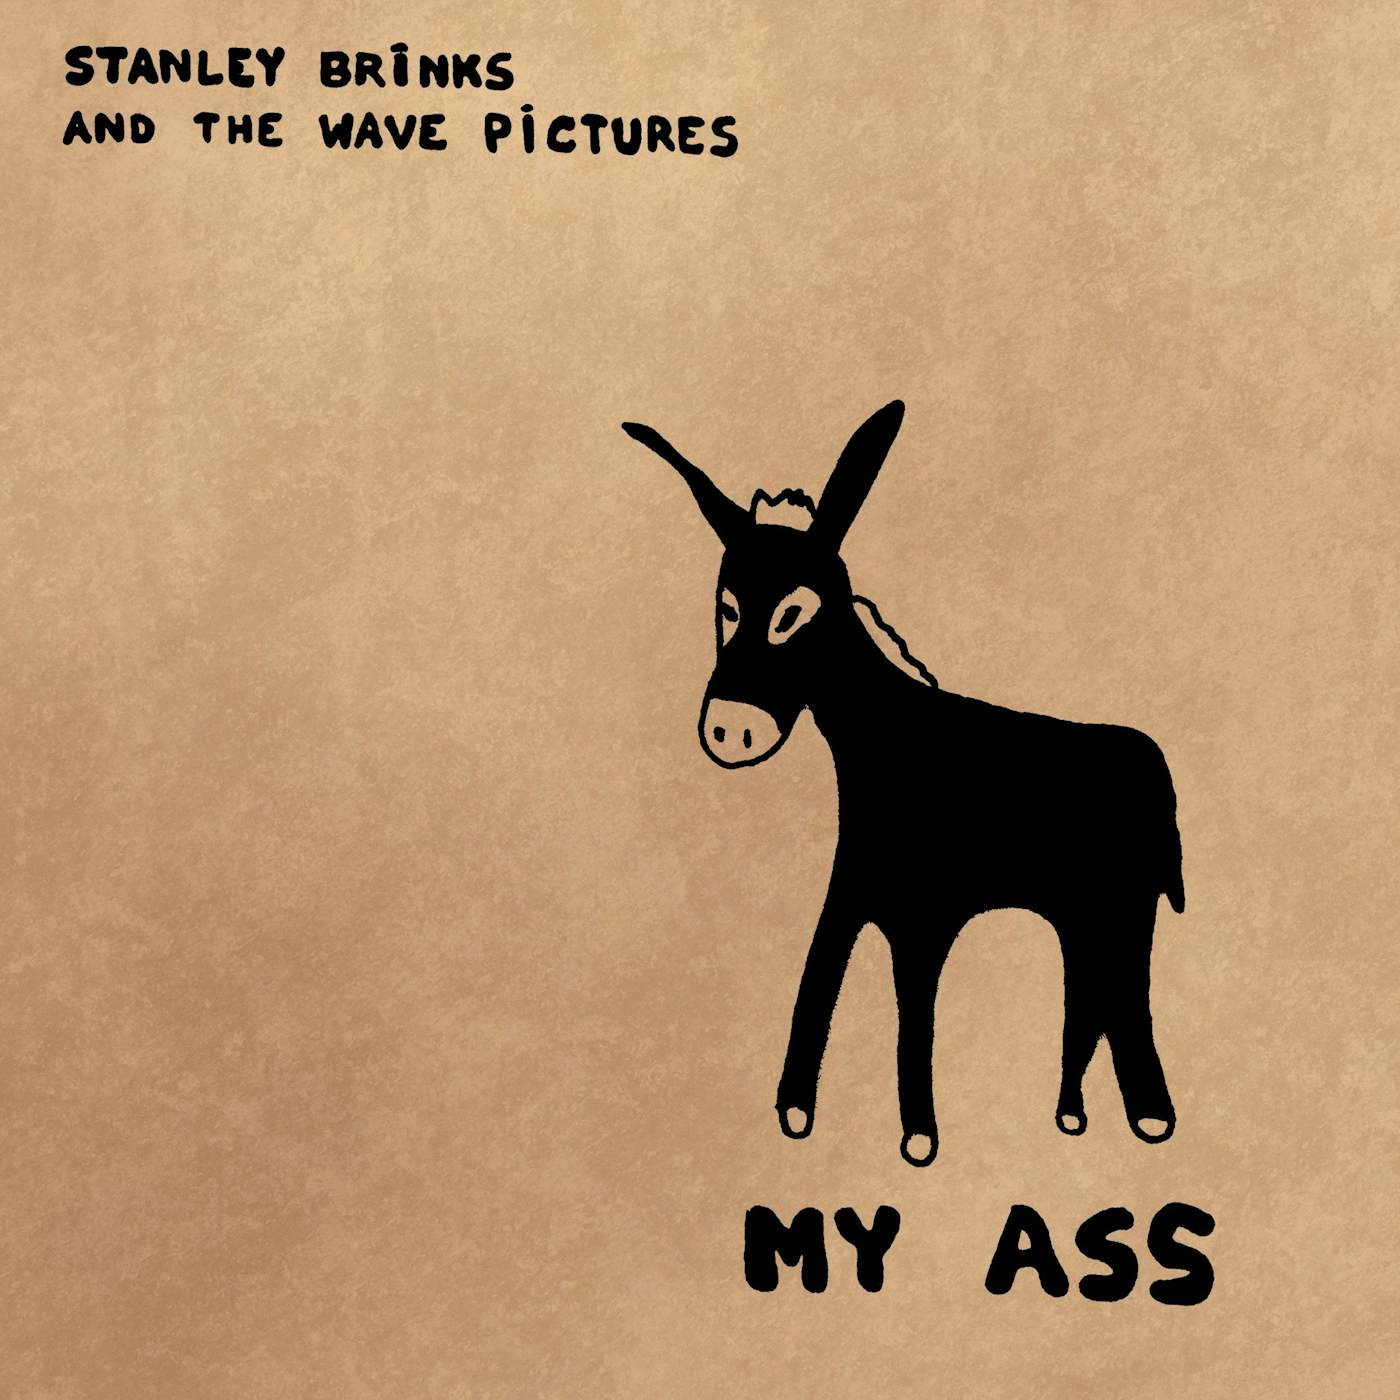 Stanley Brinks And The Wave Pictures 'My Ass' Vinyl Record